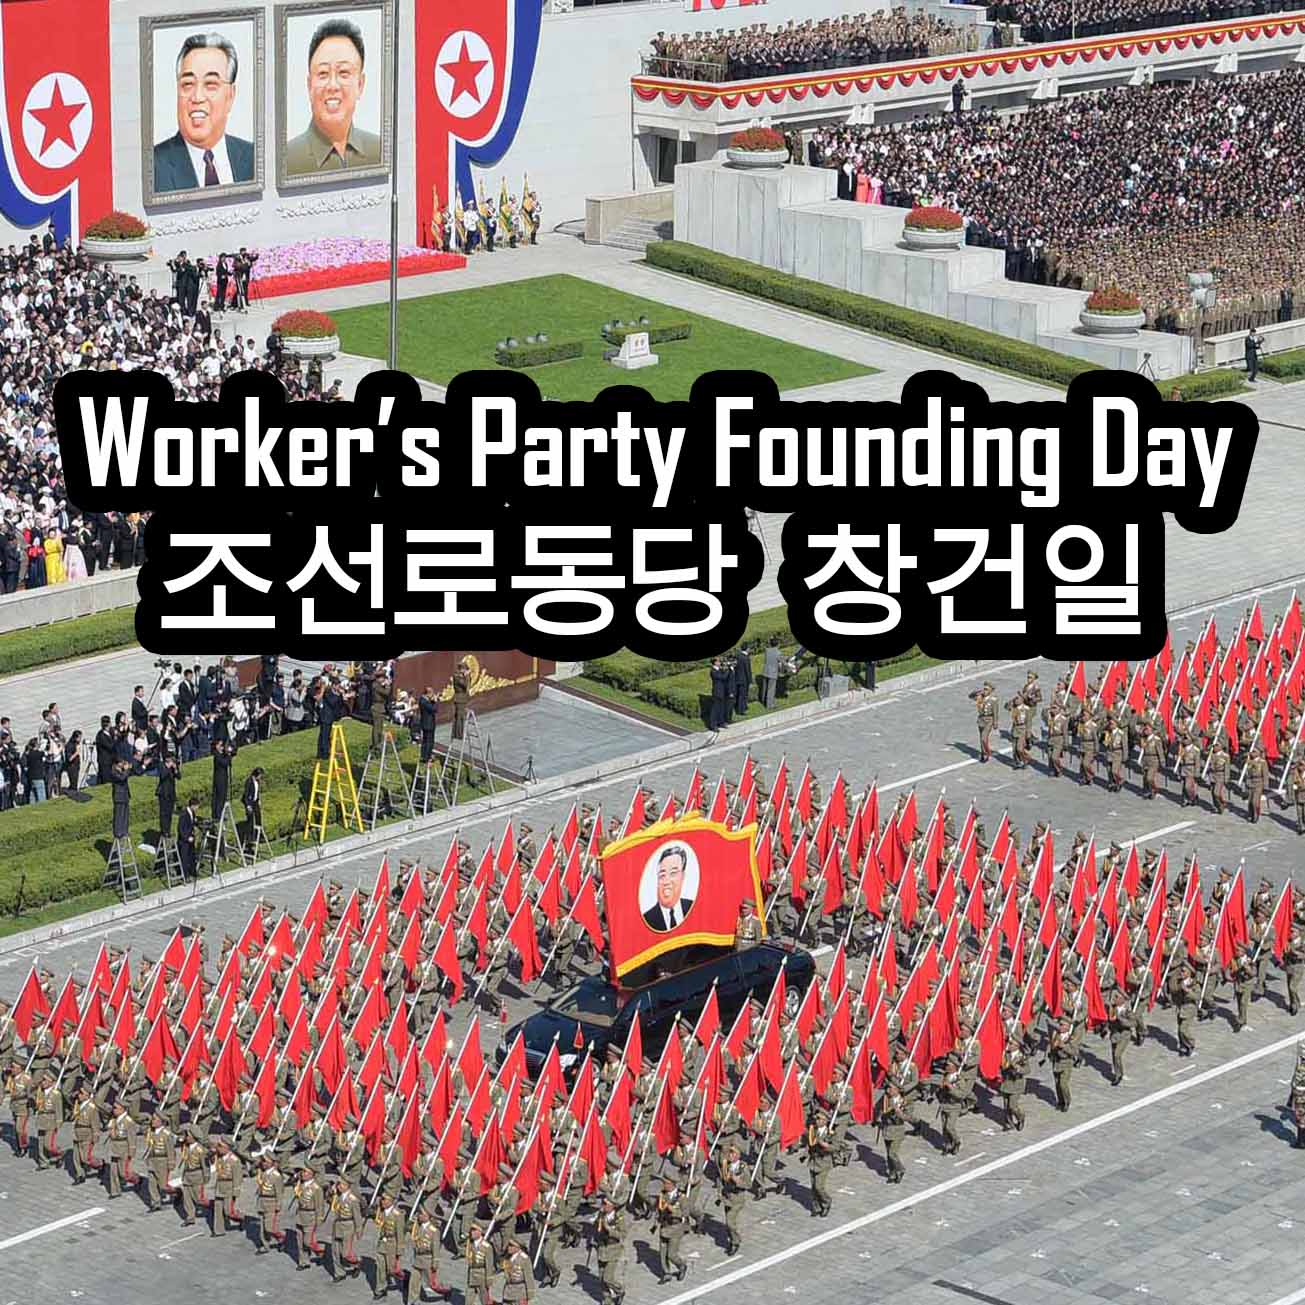 75th Anniversary of the DPRK Worker’s Party Founding Day